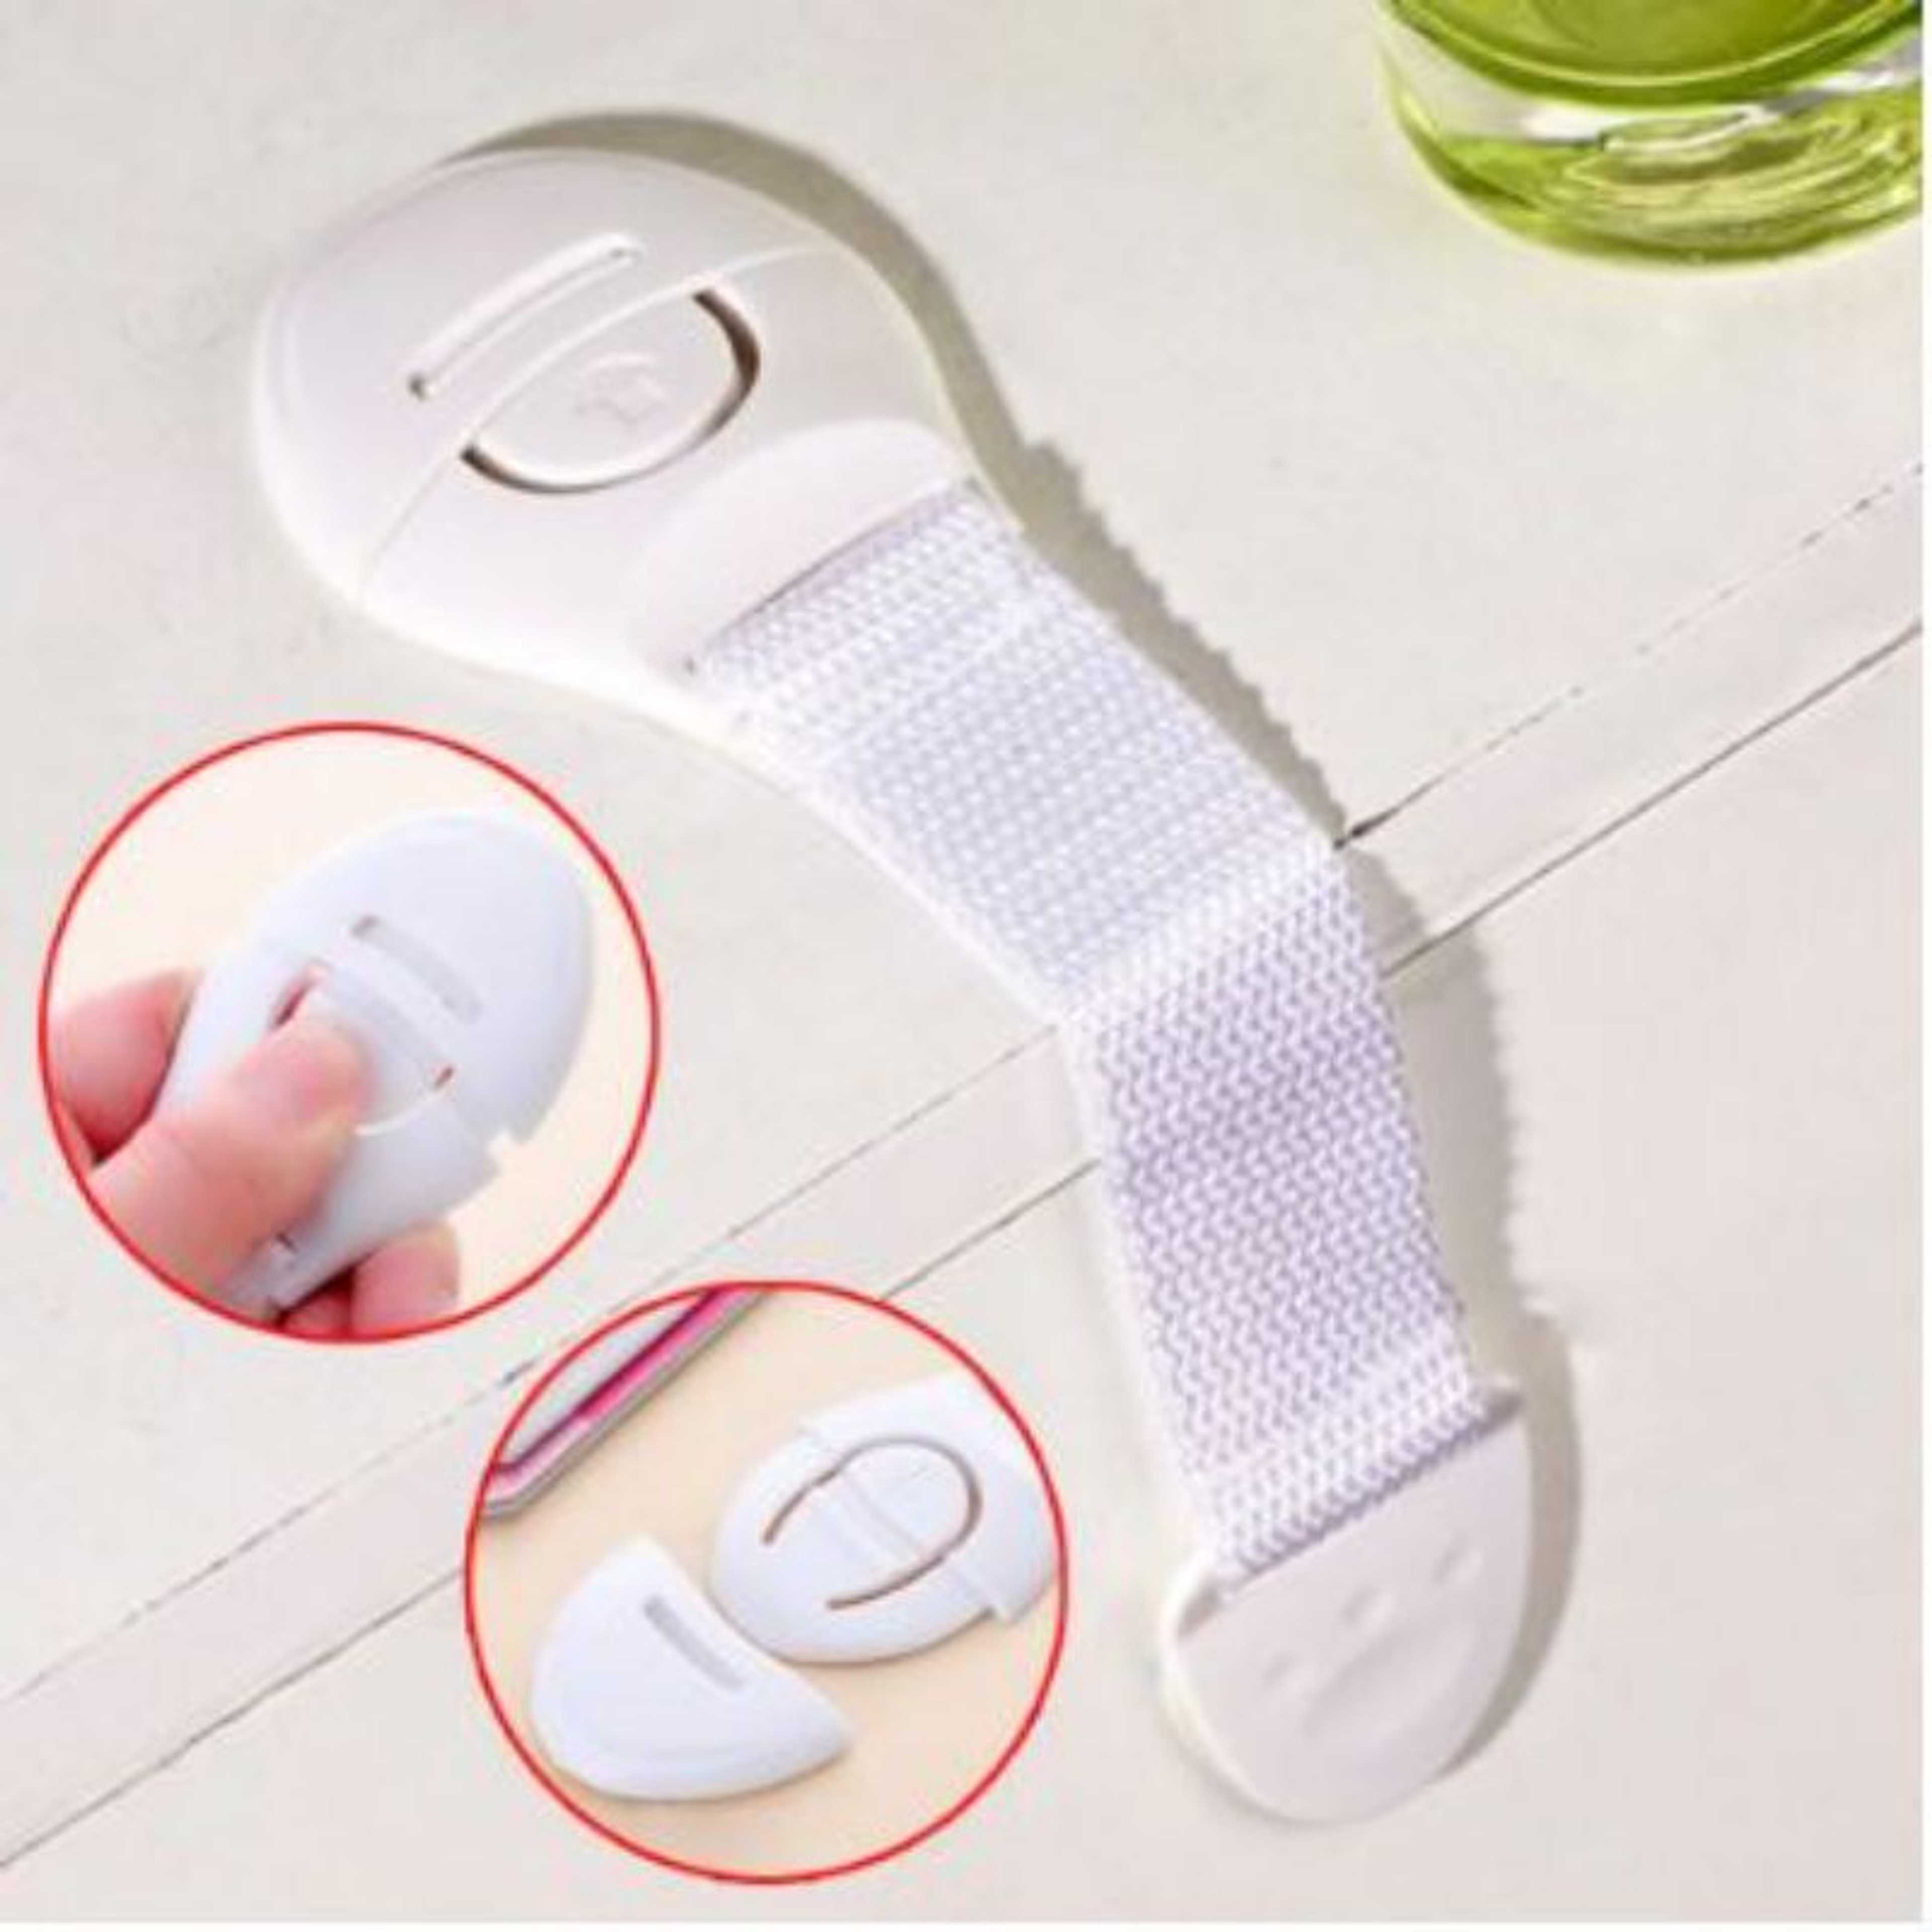 1 Piece Kids Baby Safety Locks Plastic Children Protection Baby Care Locks Cabinet Cupboard Drawer Door Baby Security Locks Protector